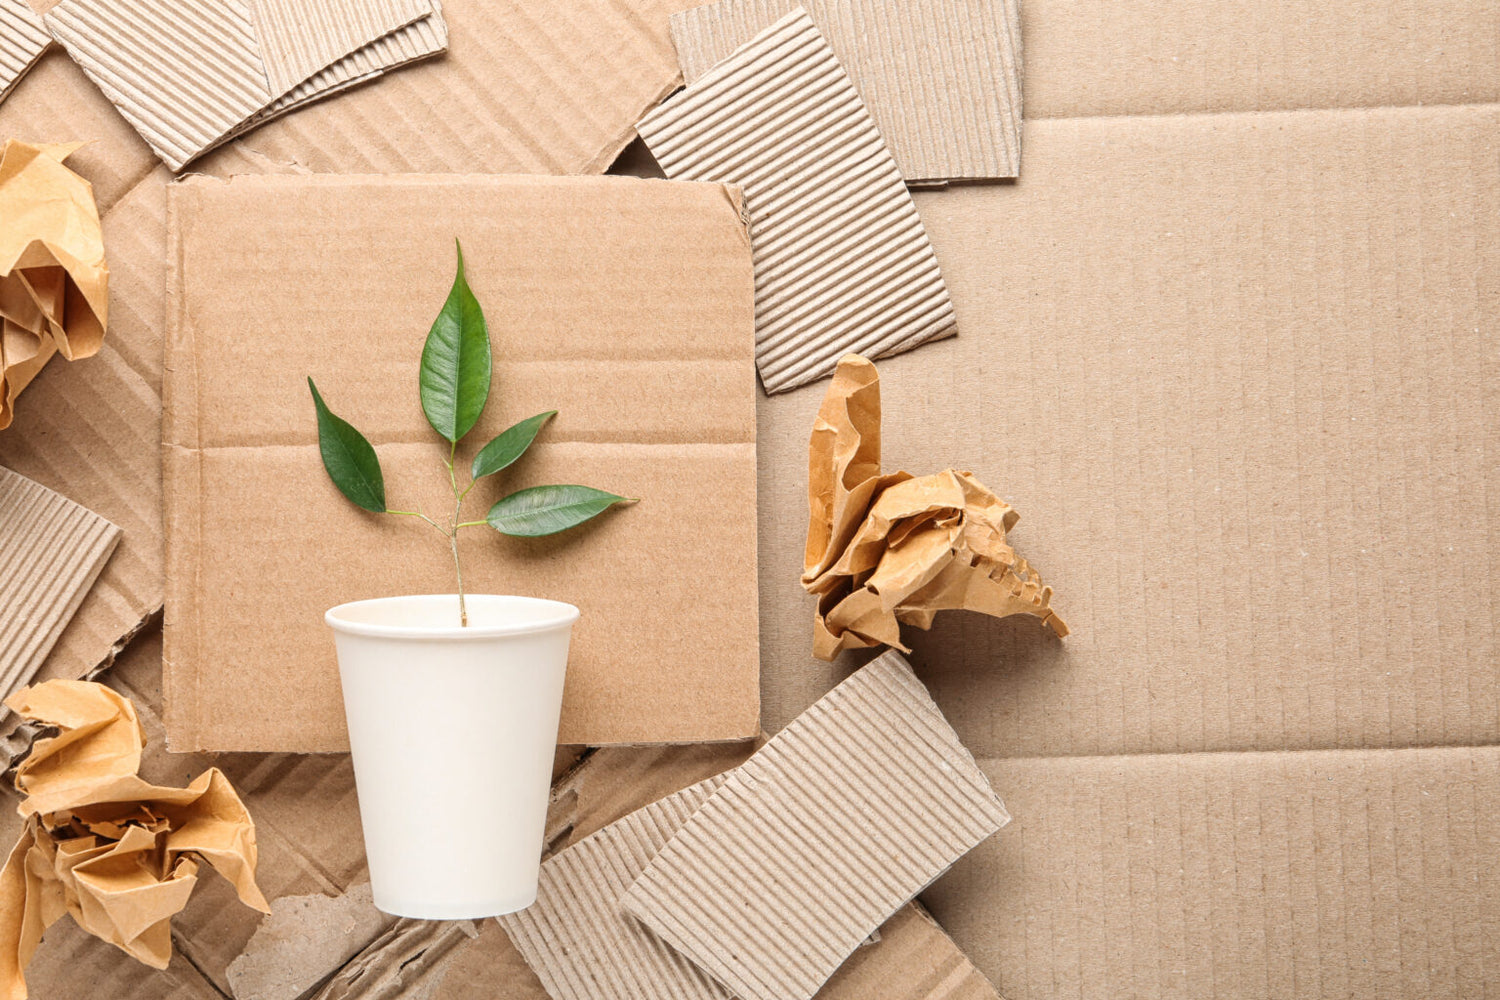 Plant Laying on Cardboard Background